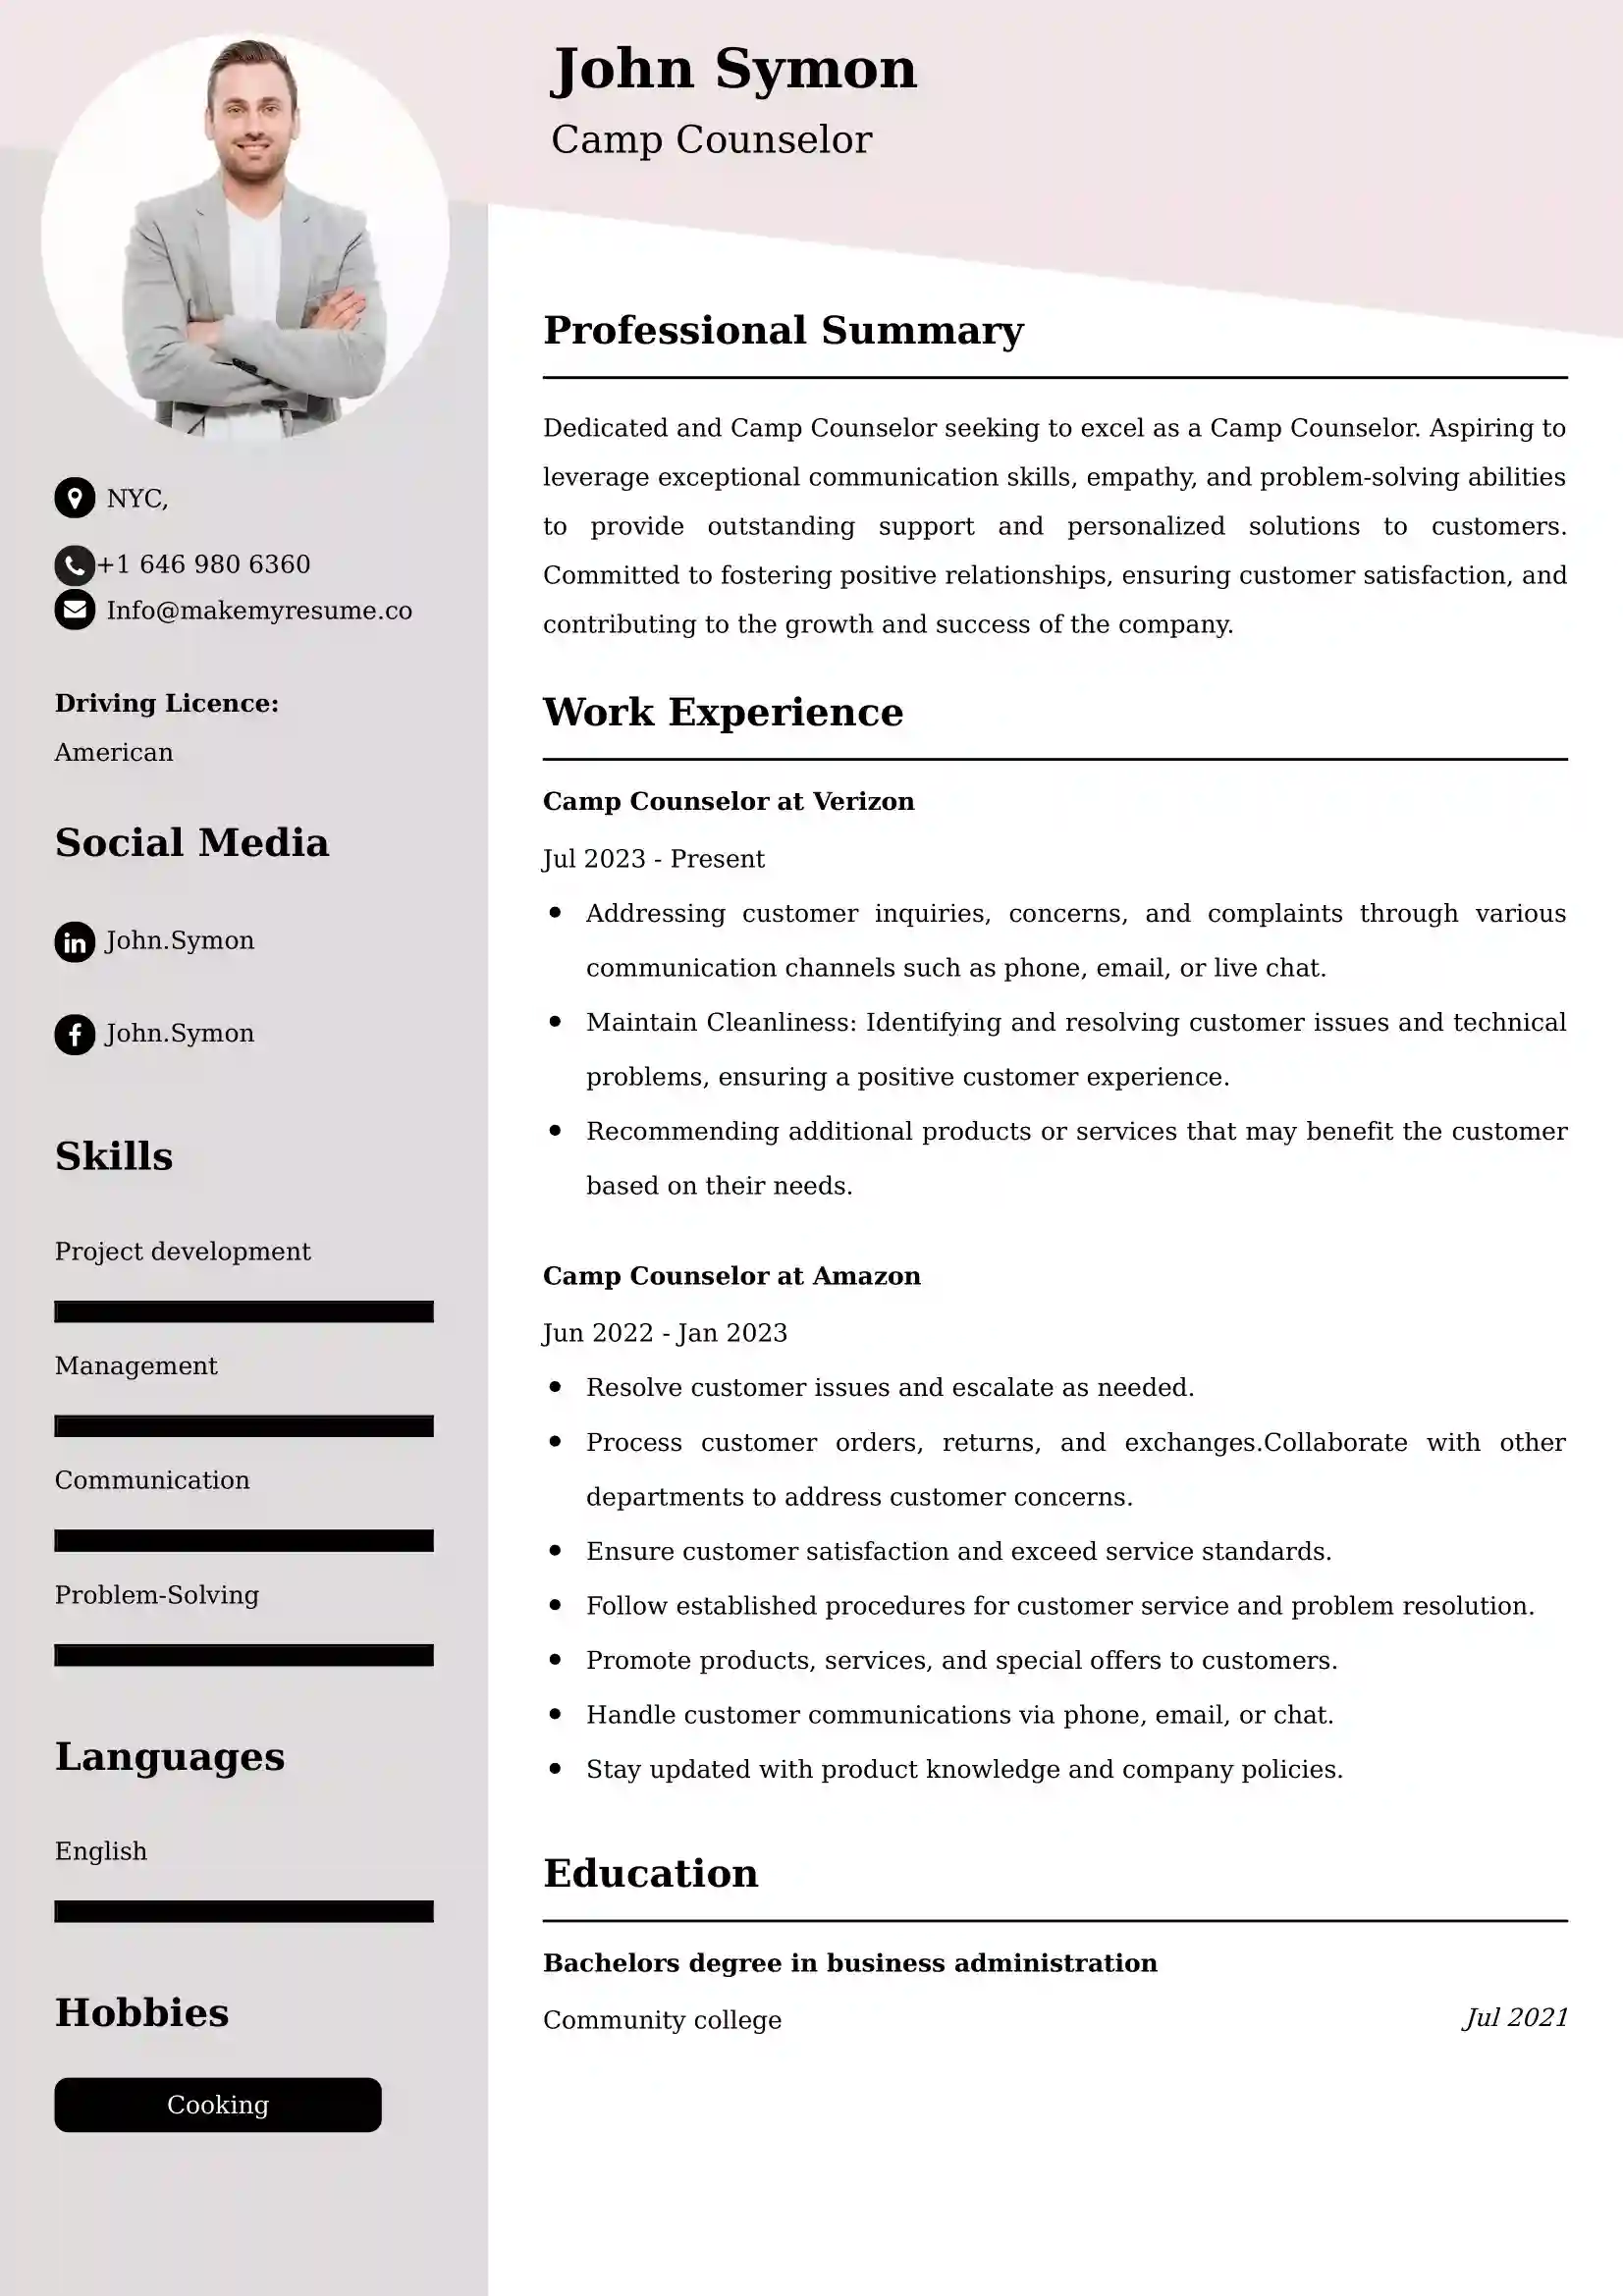 Camp Counselor Resume Examples - UK Format, Latest Template.